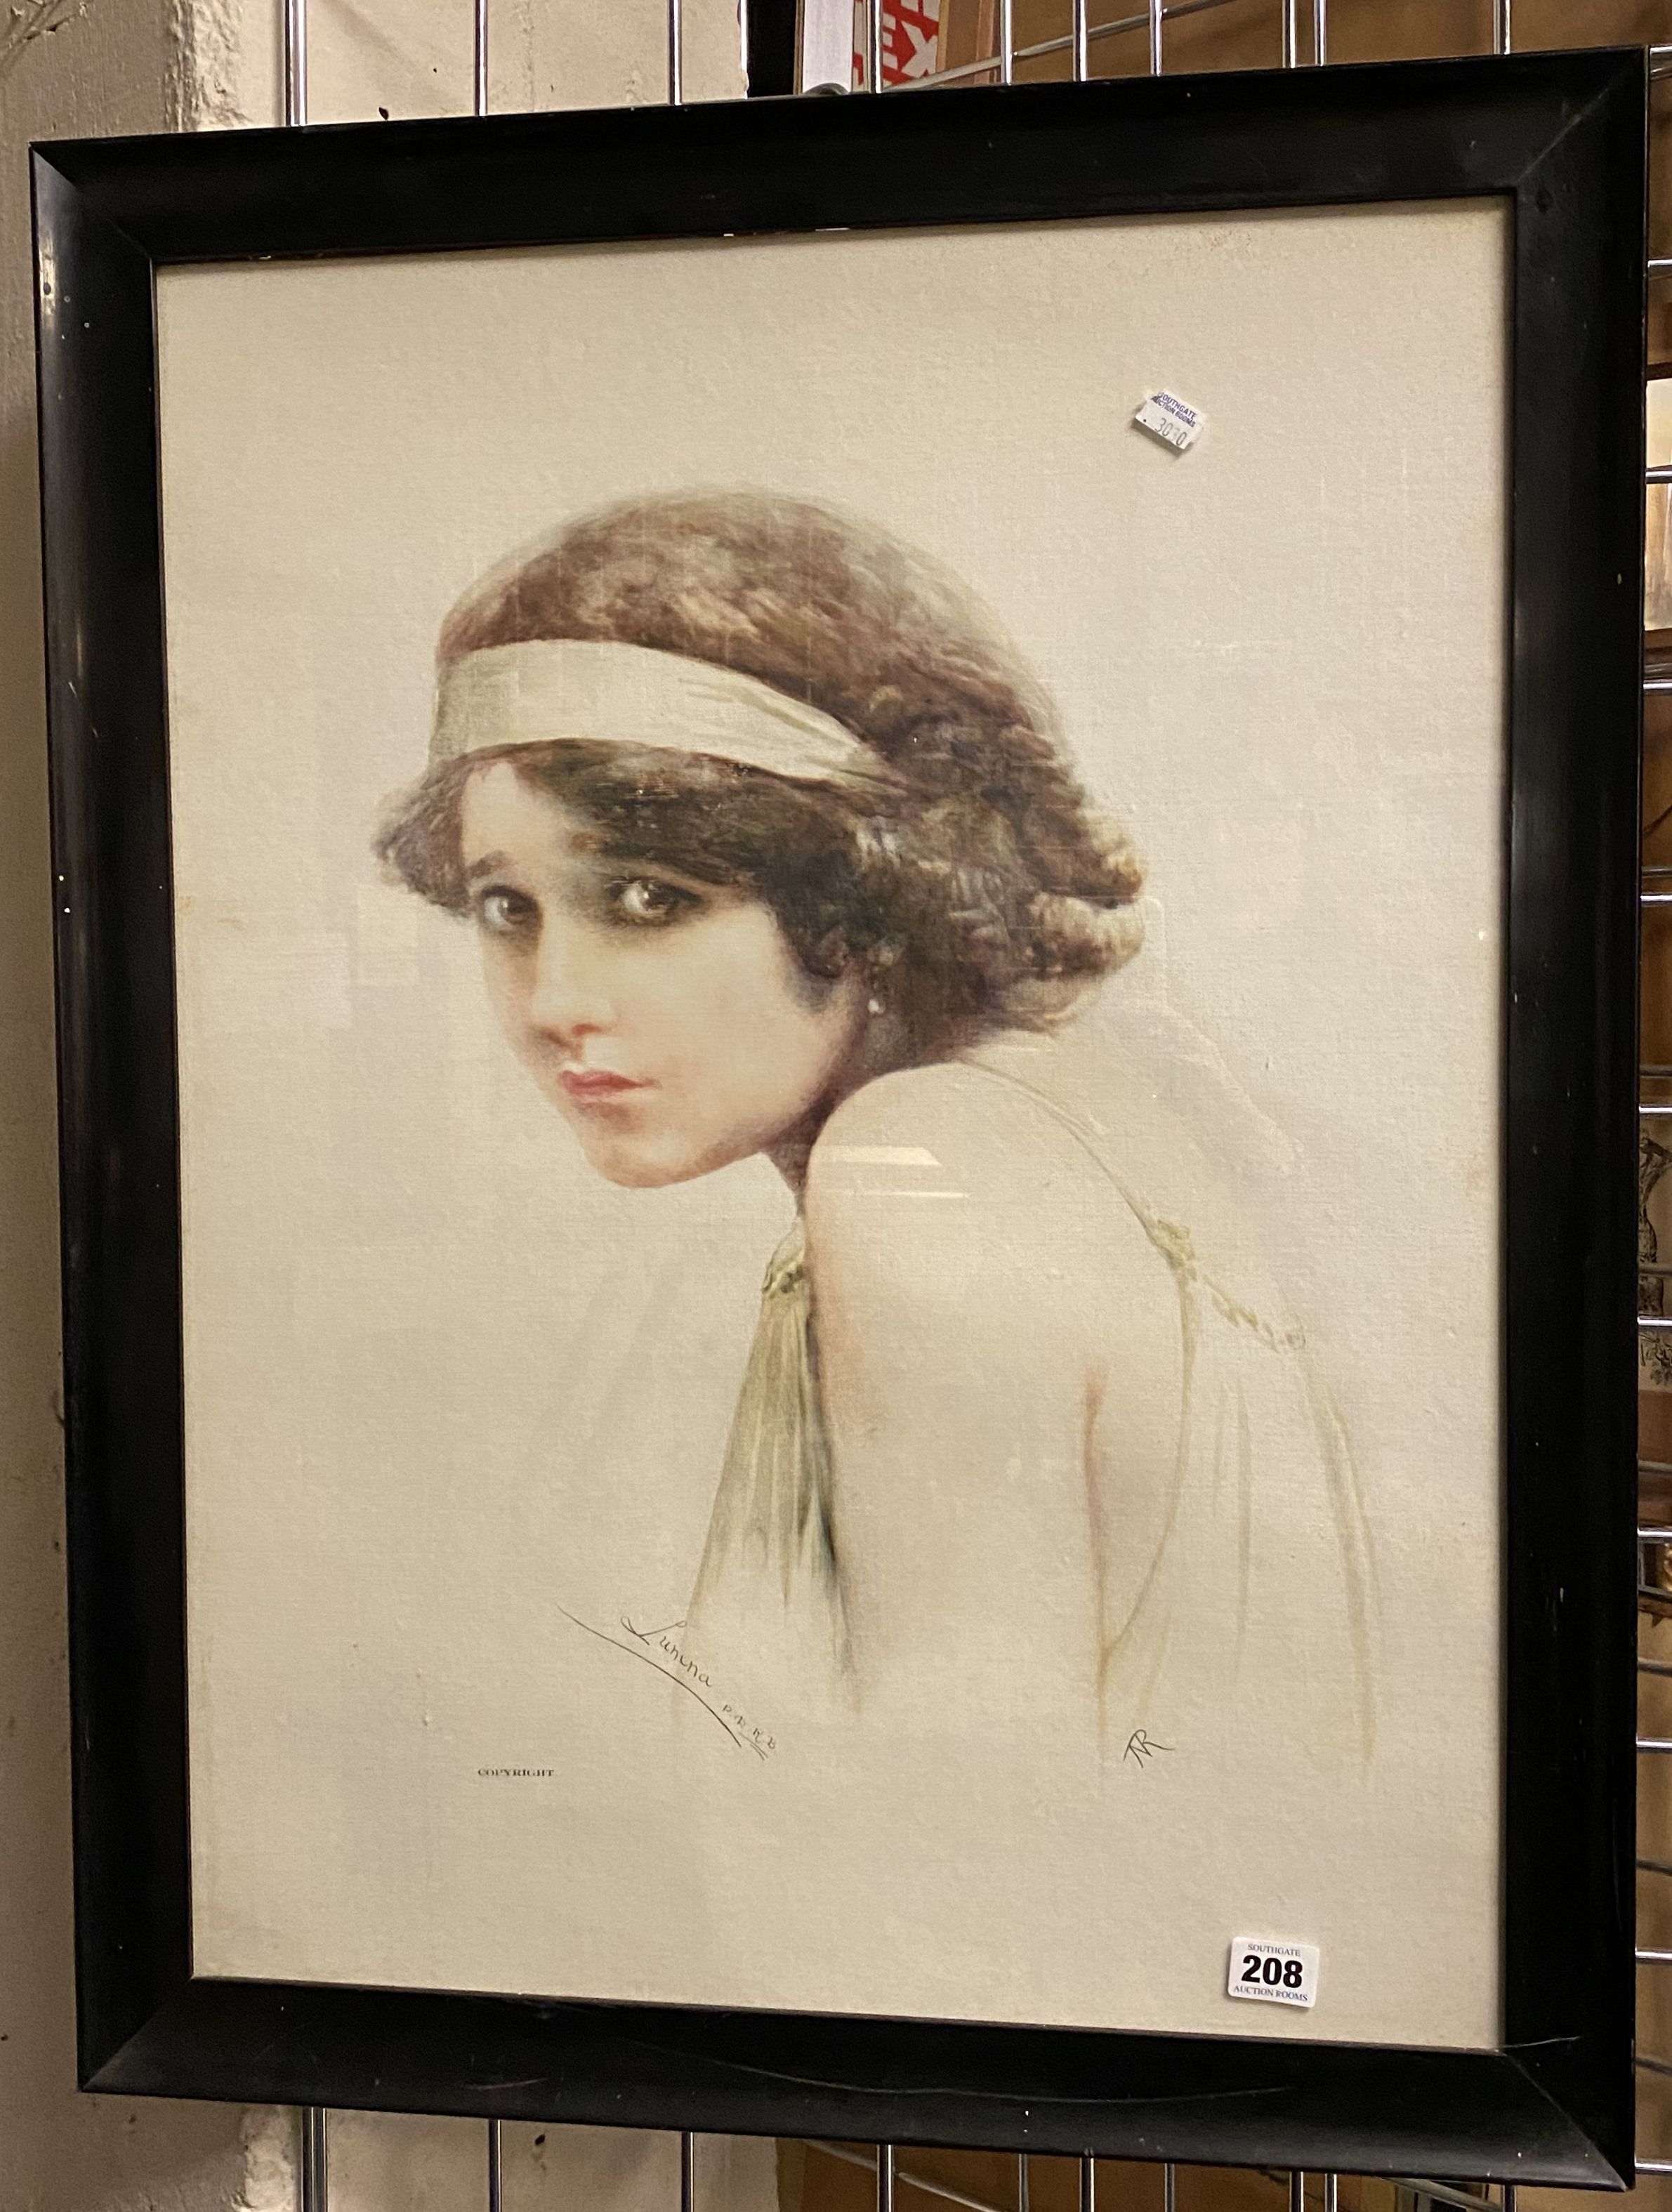 FRAMED PRINT OF A YOUNG GIRL LUNINIA